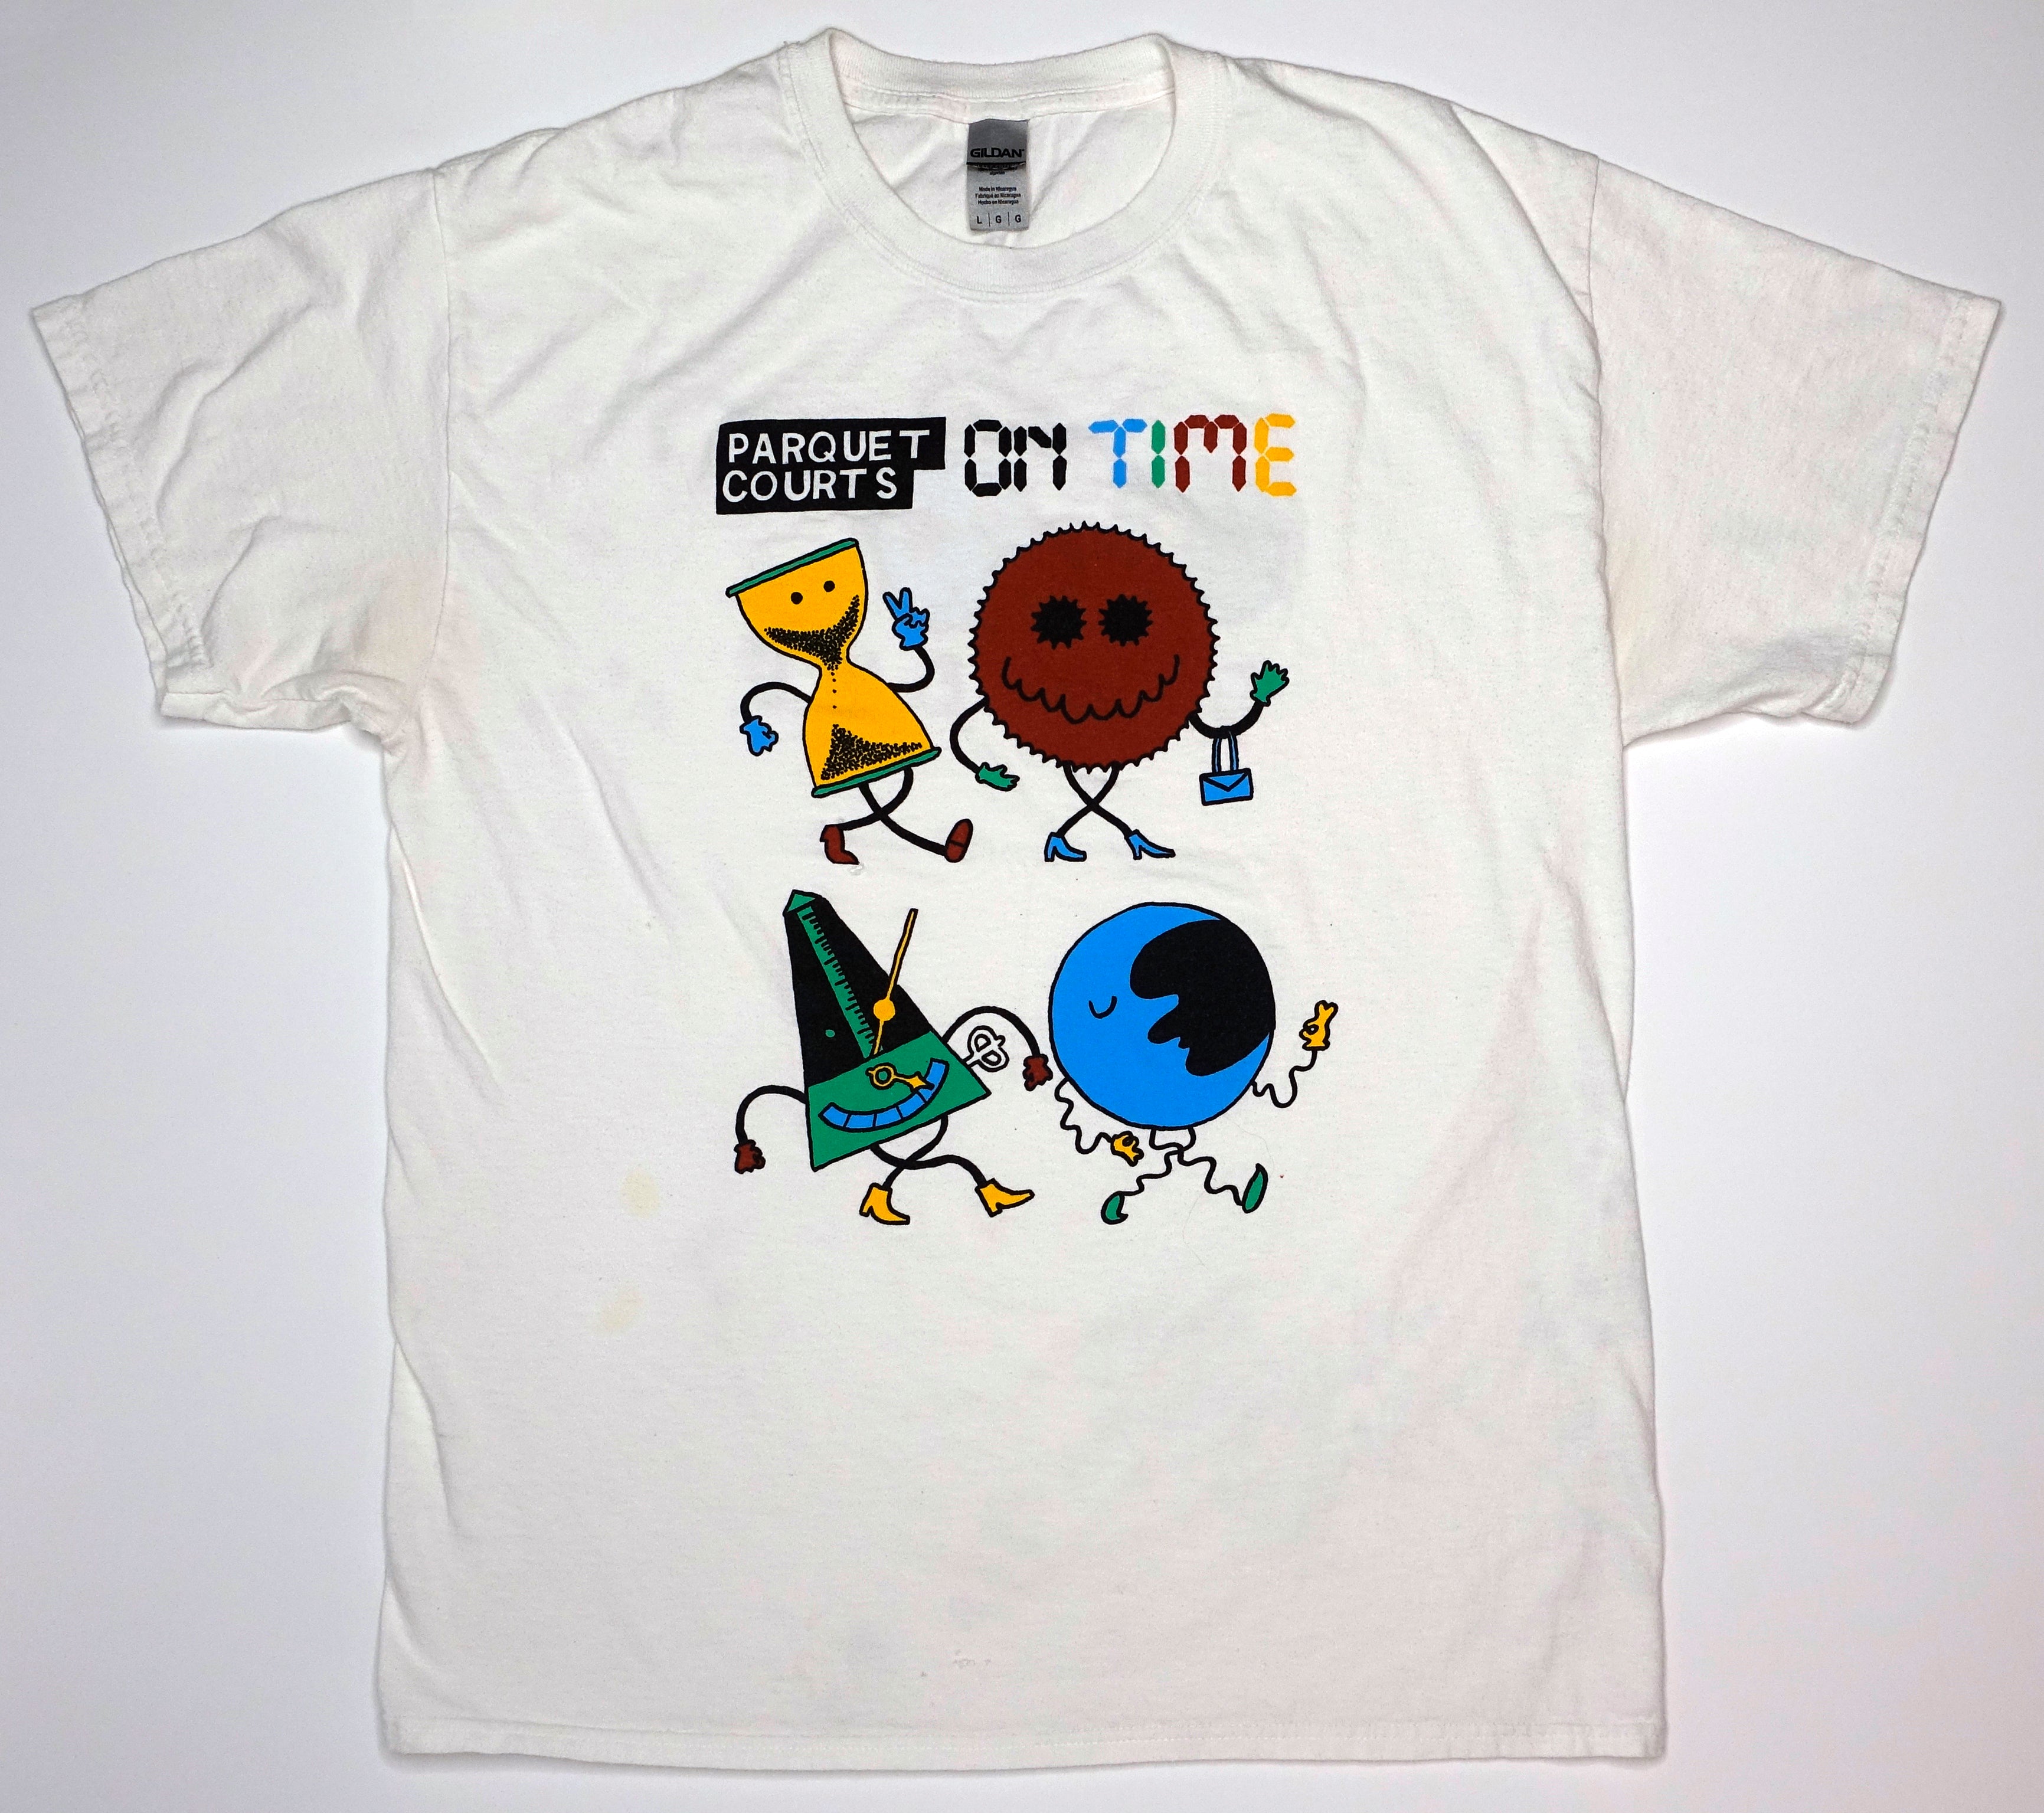 Parquet Courts - On Time 2021 Live Stream Shirt Size Large